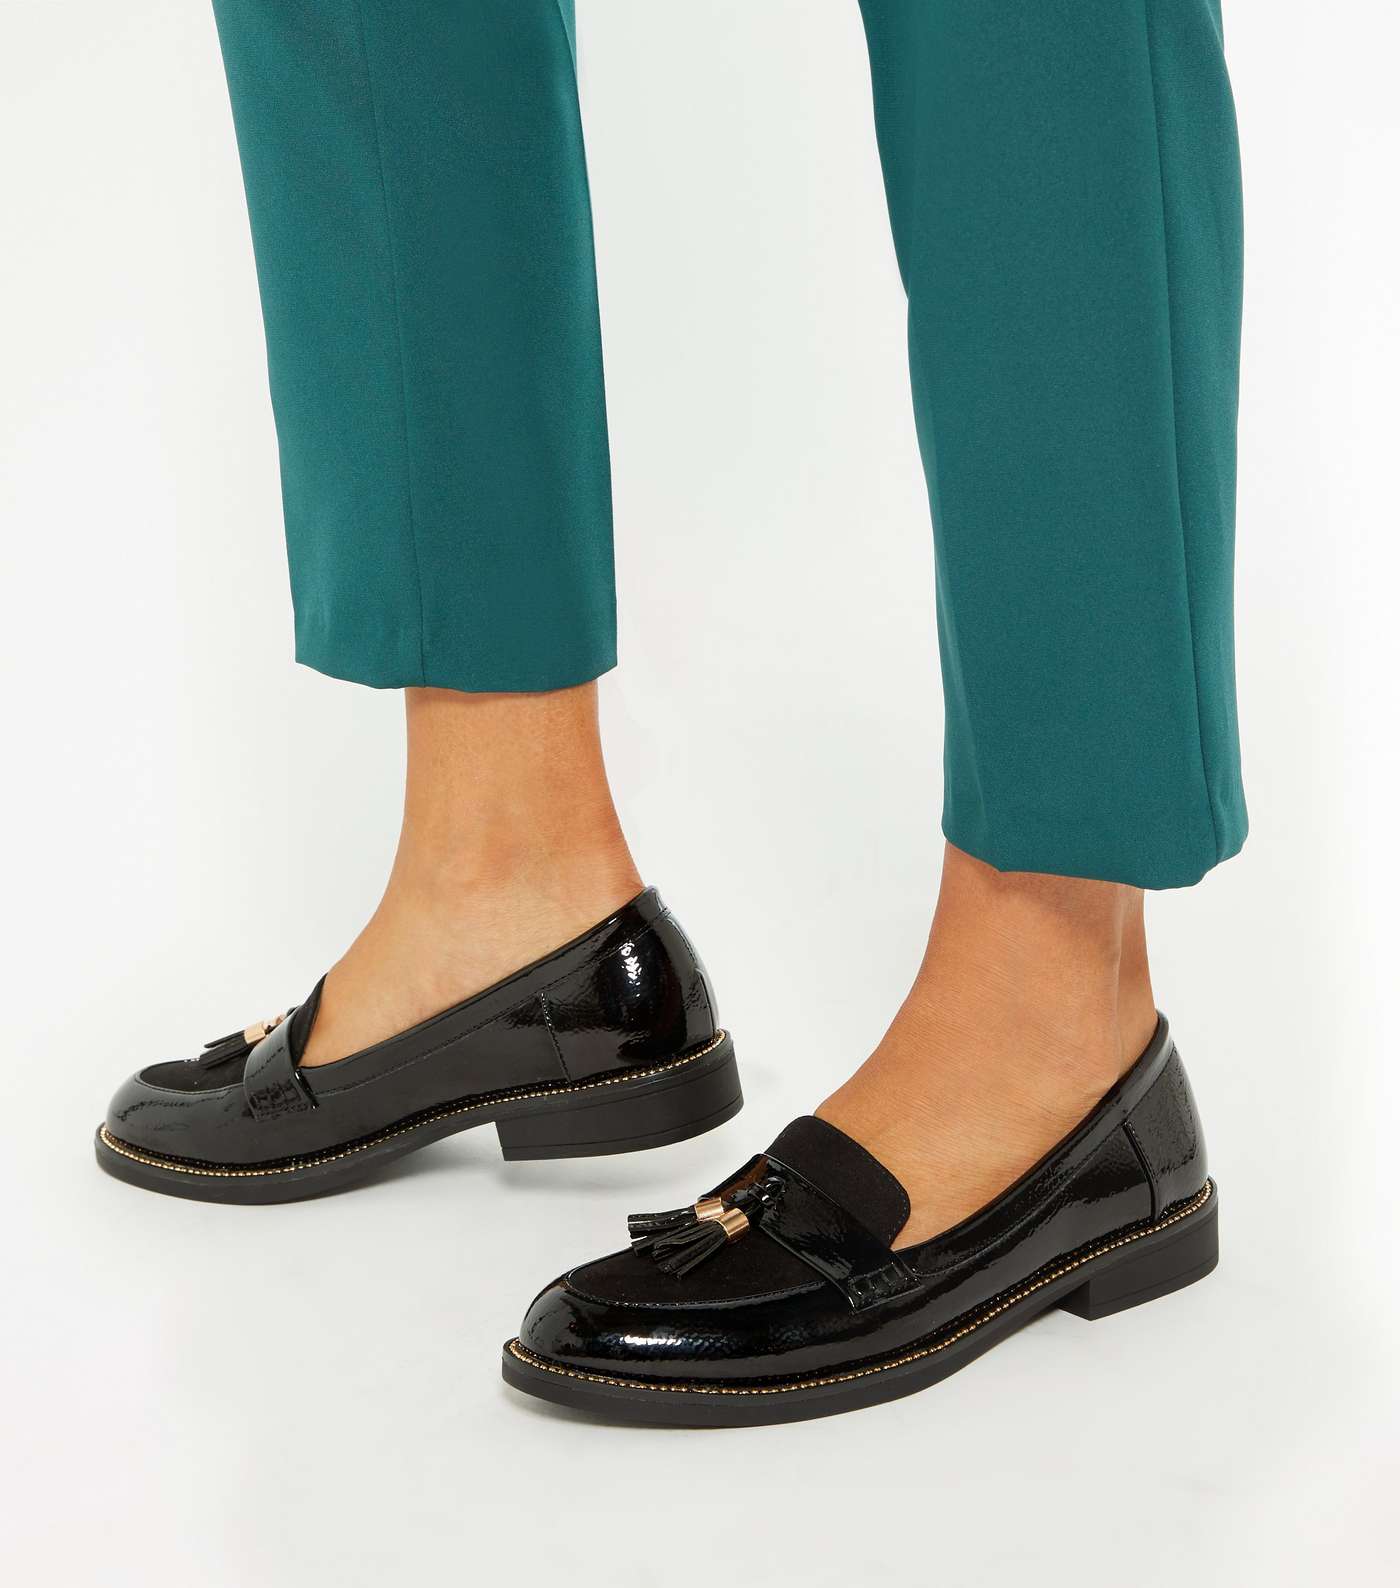 Black Patent and Suedette Tassel Loafers Image 2